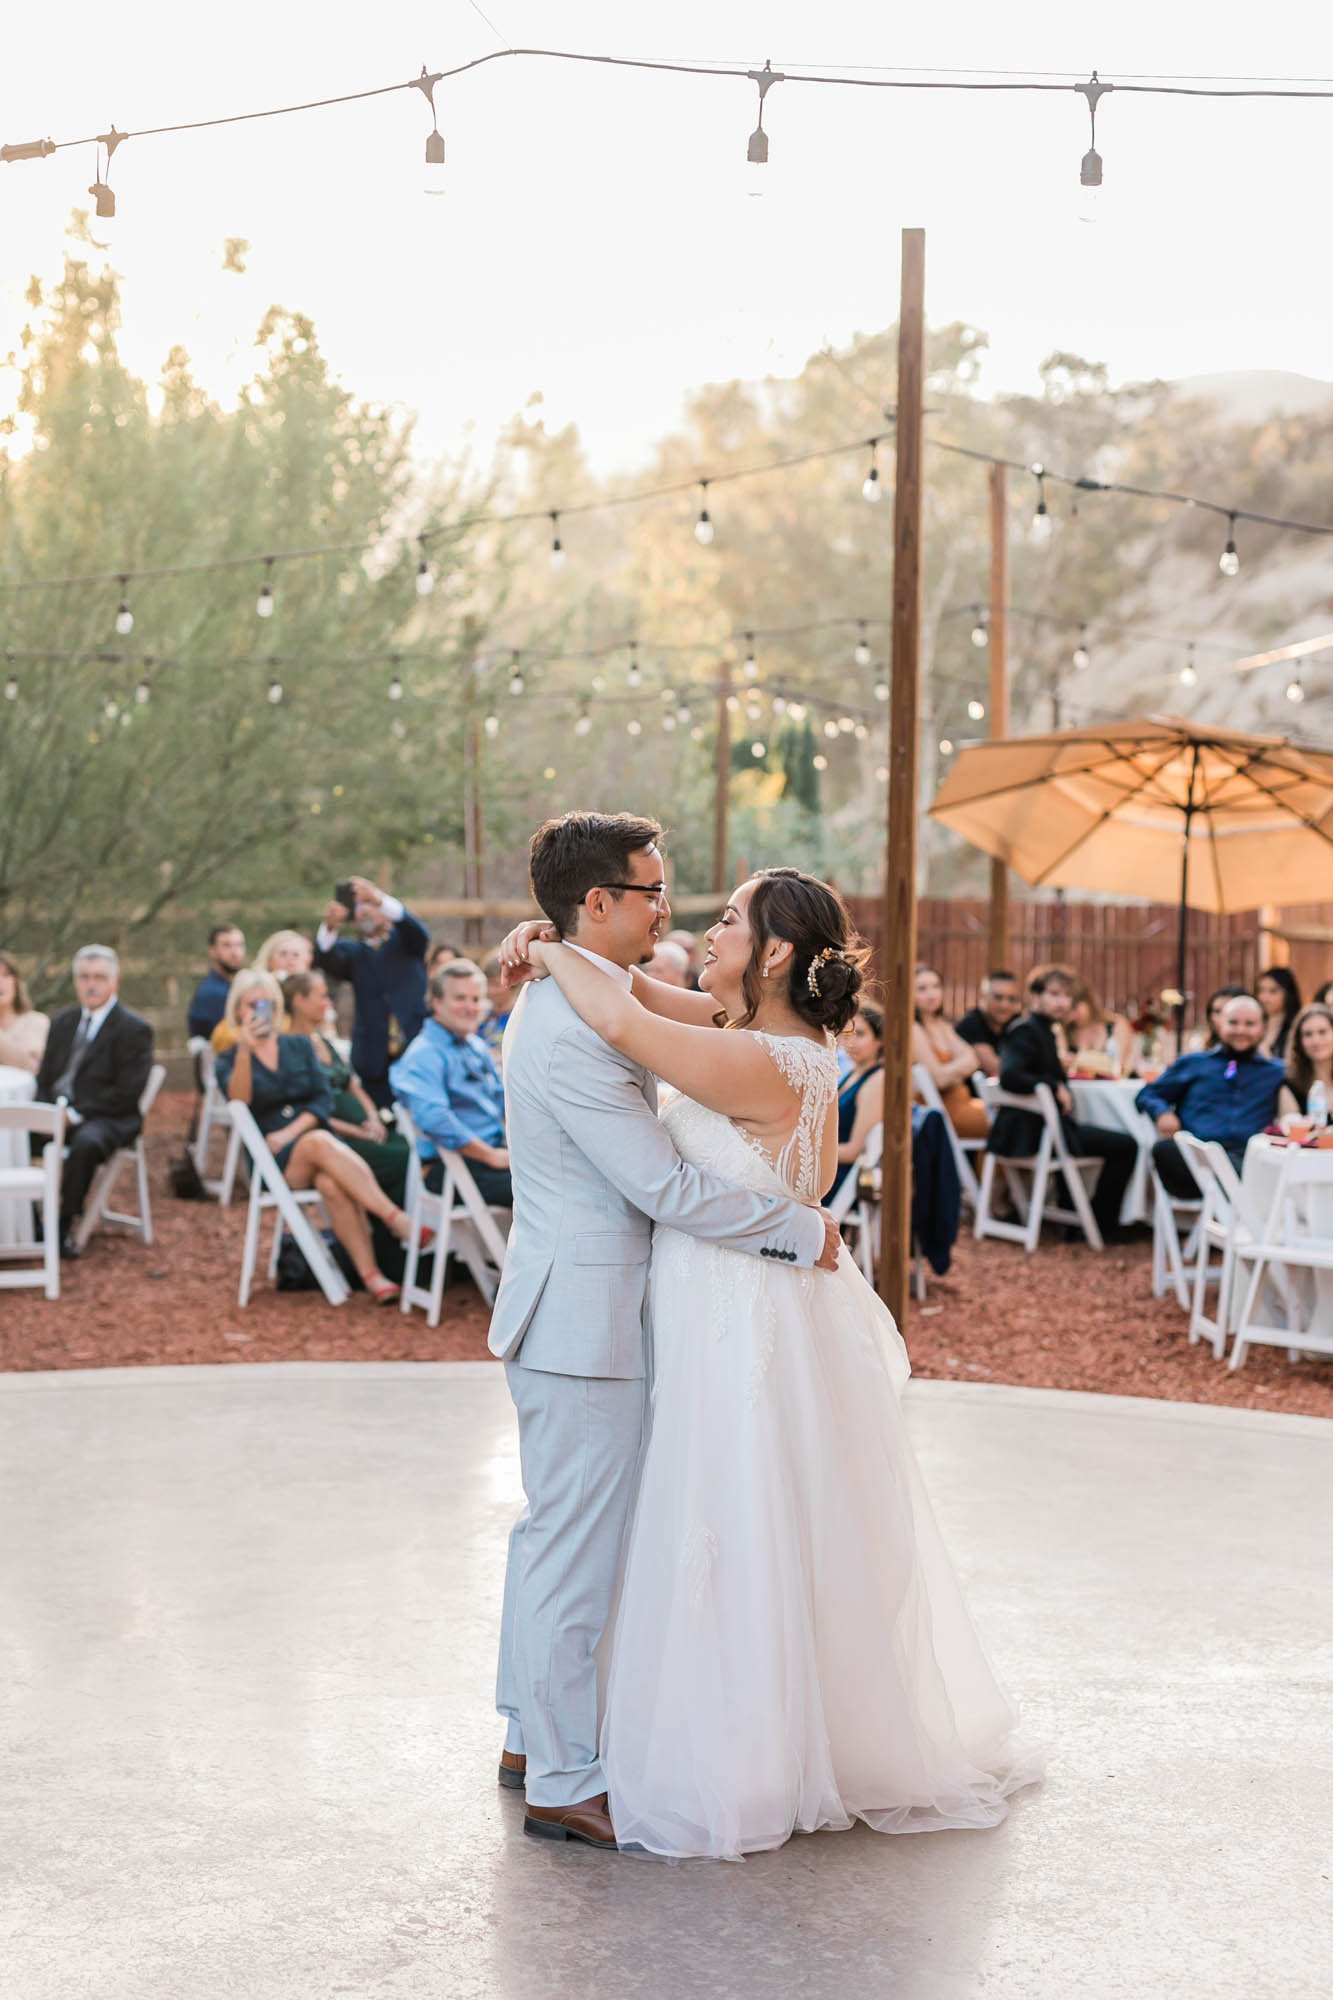  first dance fall ranch wedding with pumpkins reception at reptacular ranch 